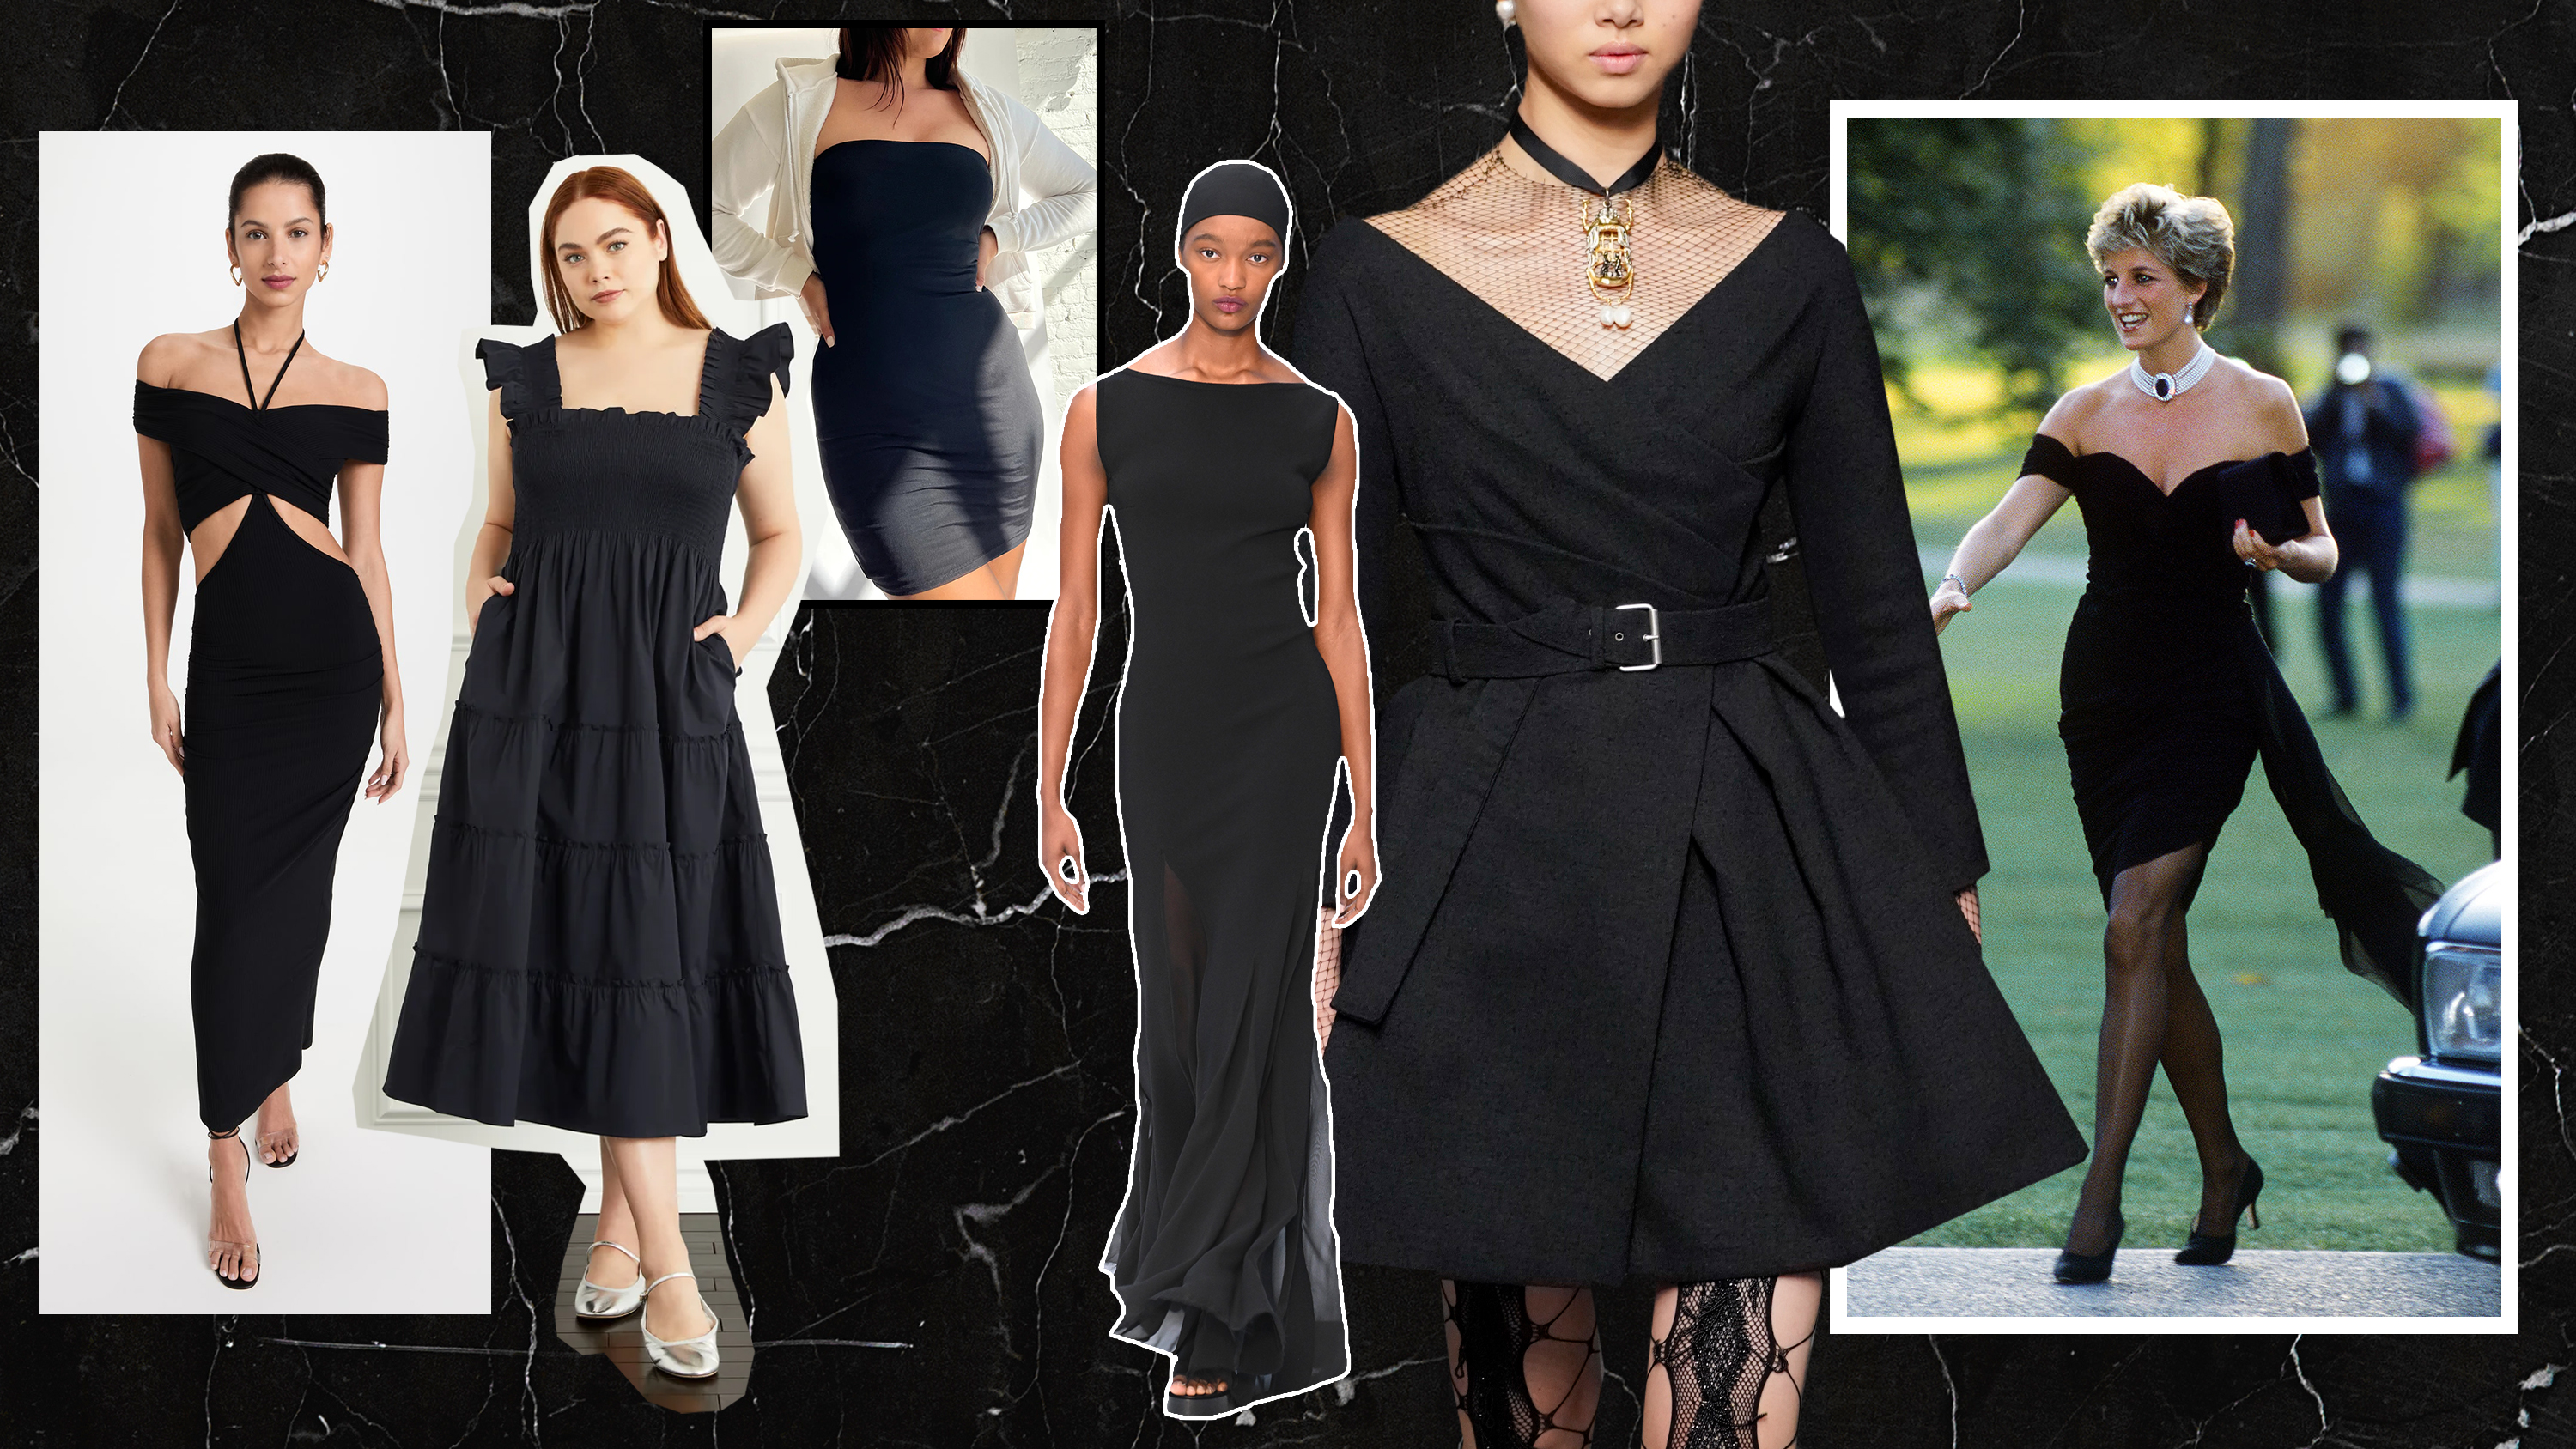 Show-Stopping Style Black One-Shoulder Cutout Maxi Dress